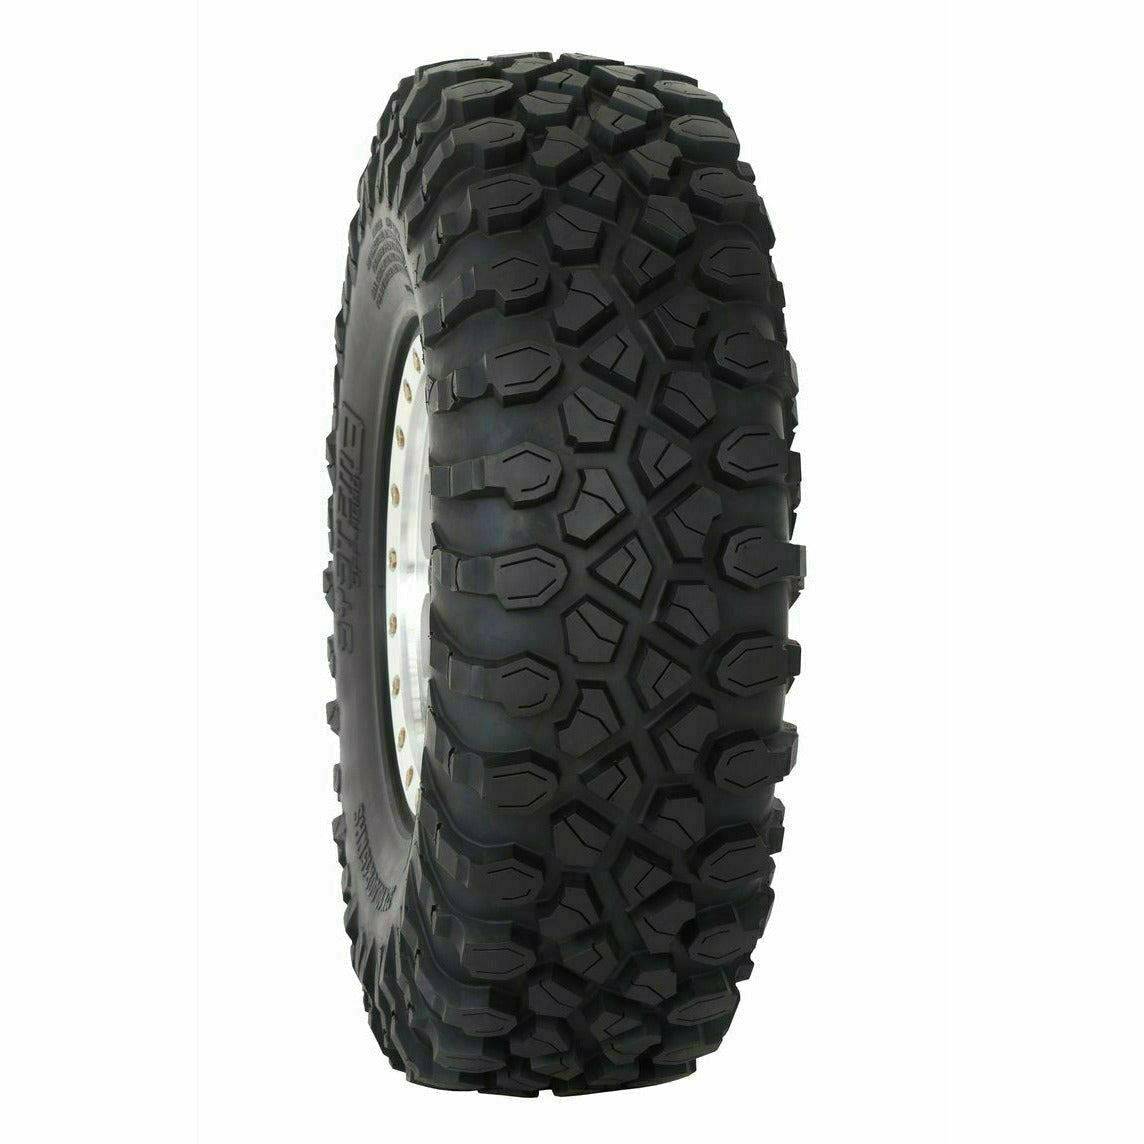 System 3 Offroad XC450 Tire